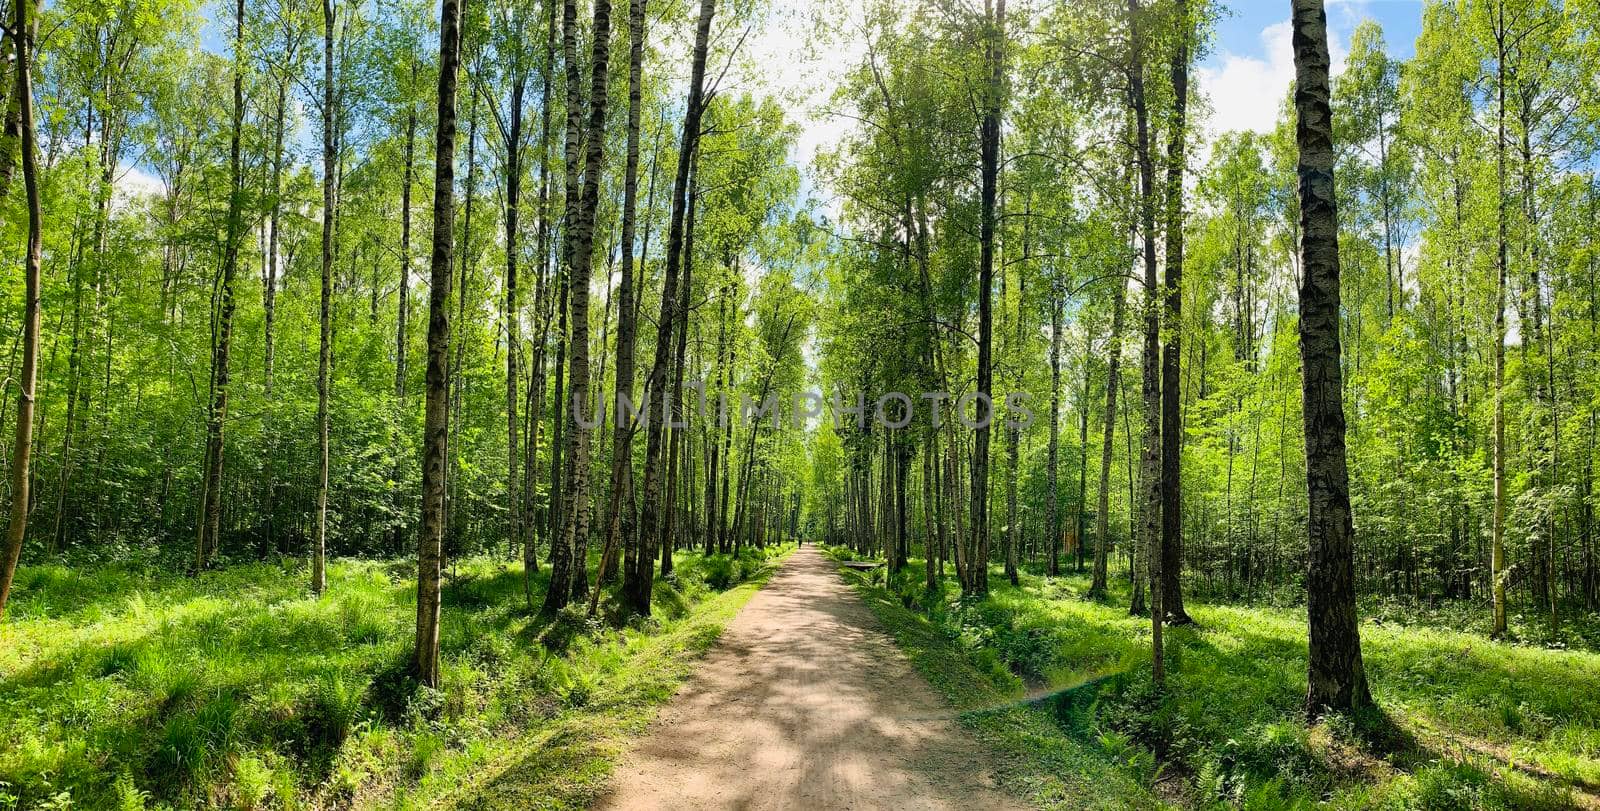 Panoramic image of the straight path in the forest among birch trunks in sunny weather, sun rays break through the foliage, nobody by vladimirdrozdin